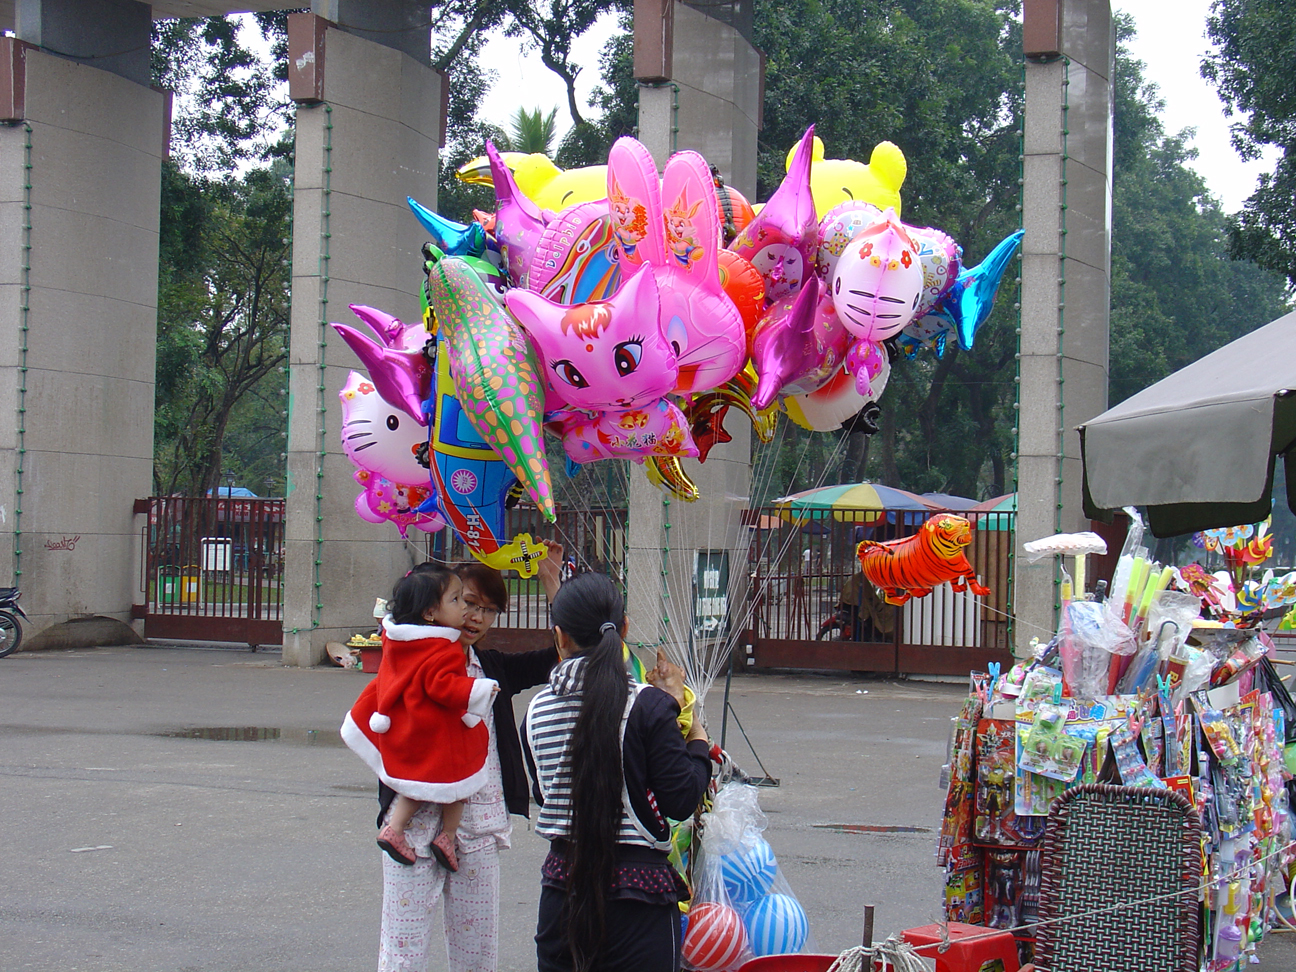 A women buying balloons for a young child